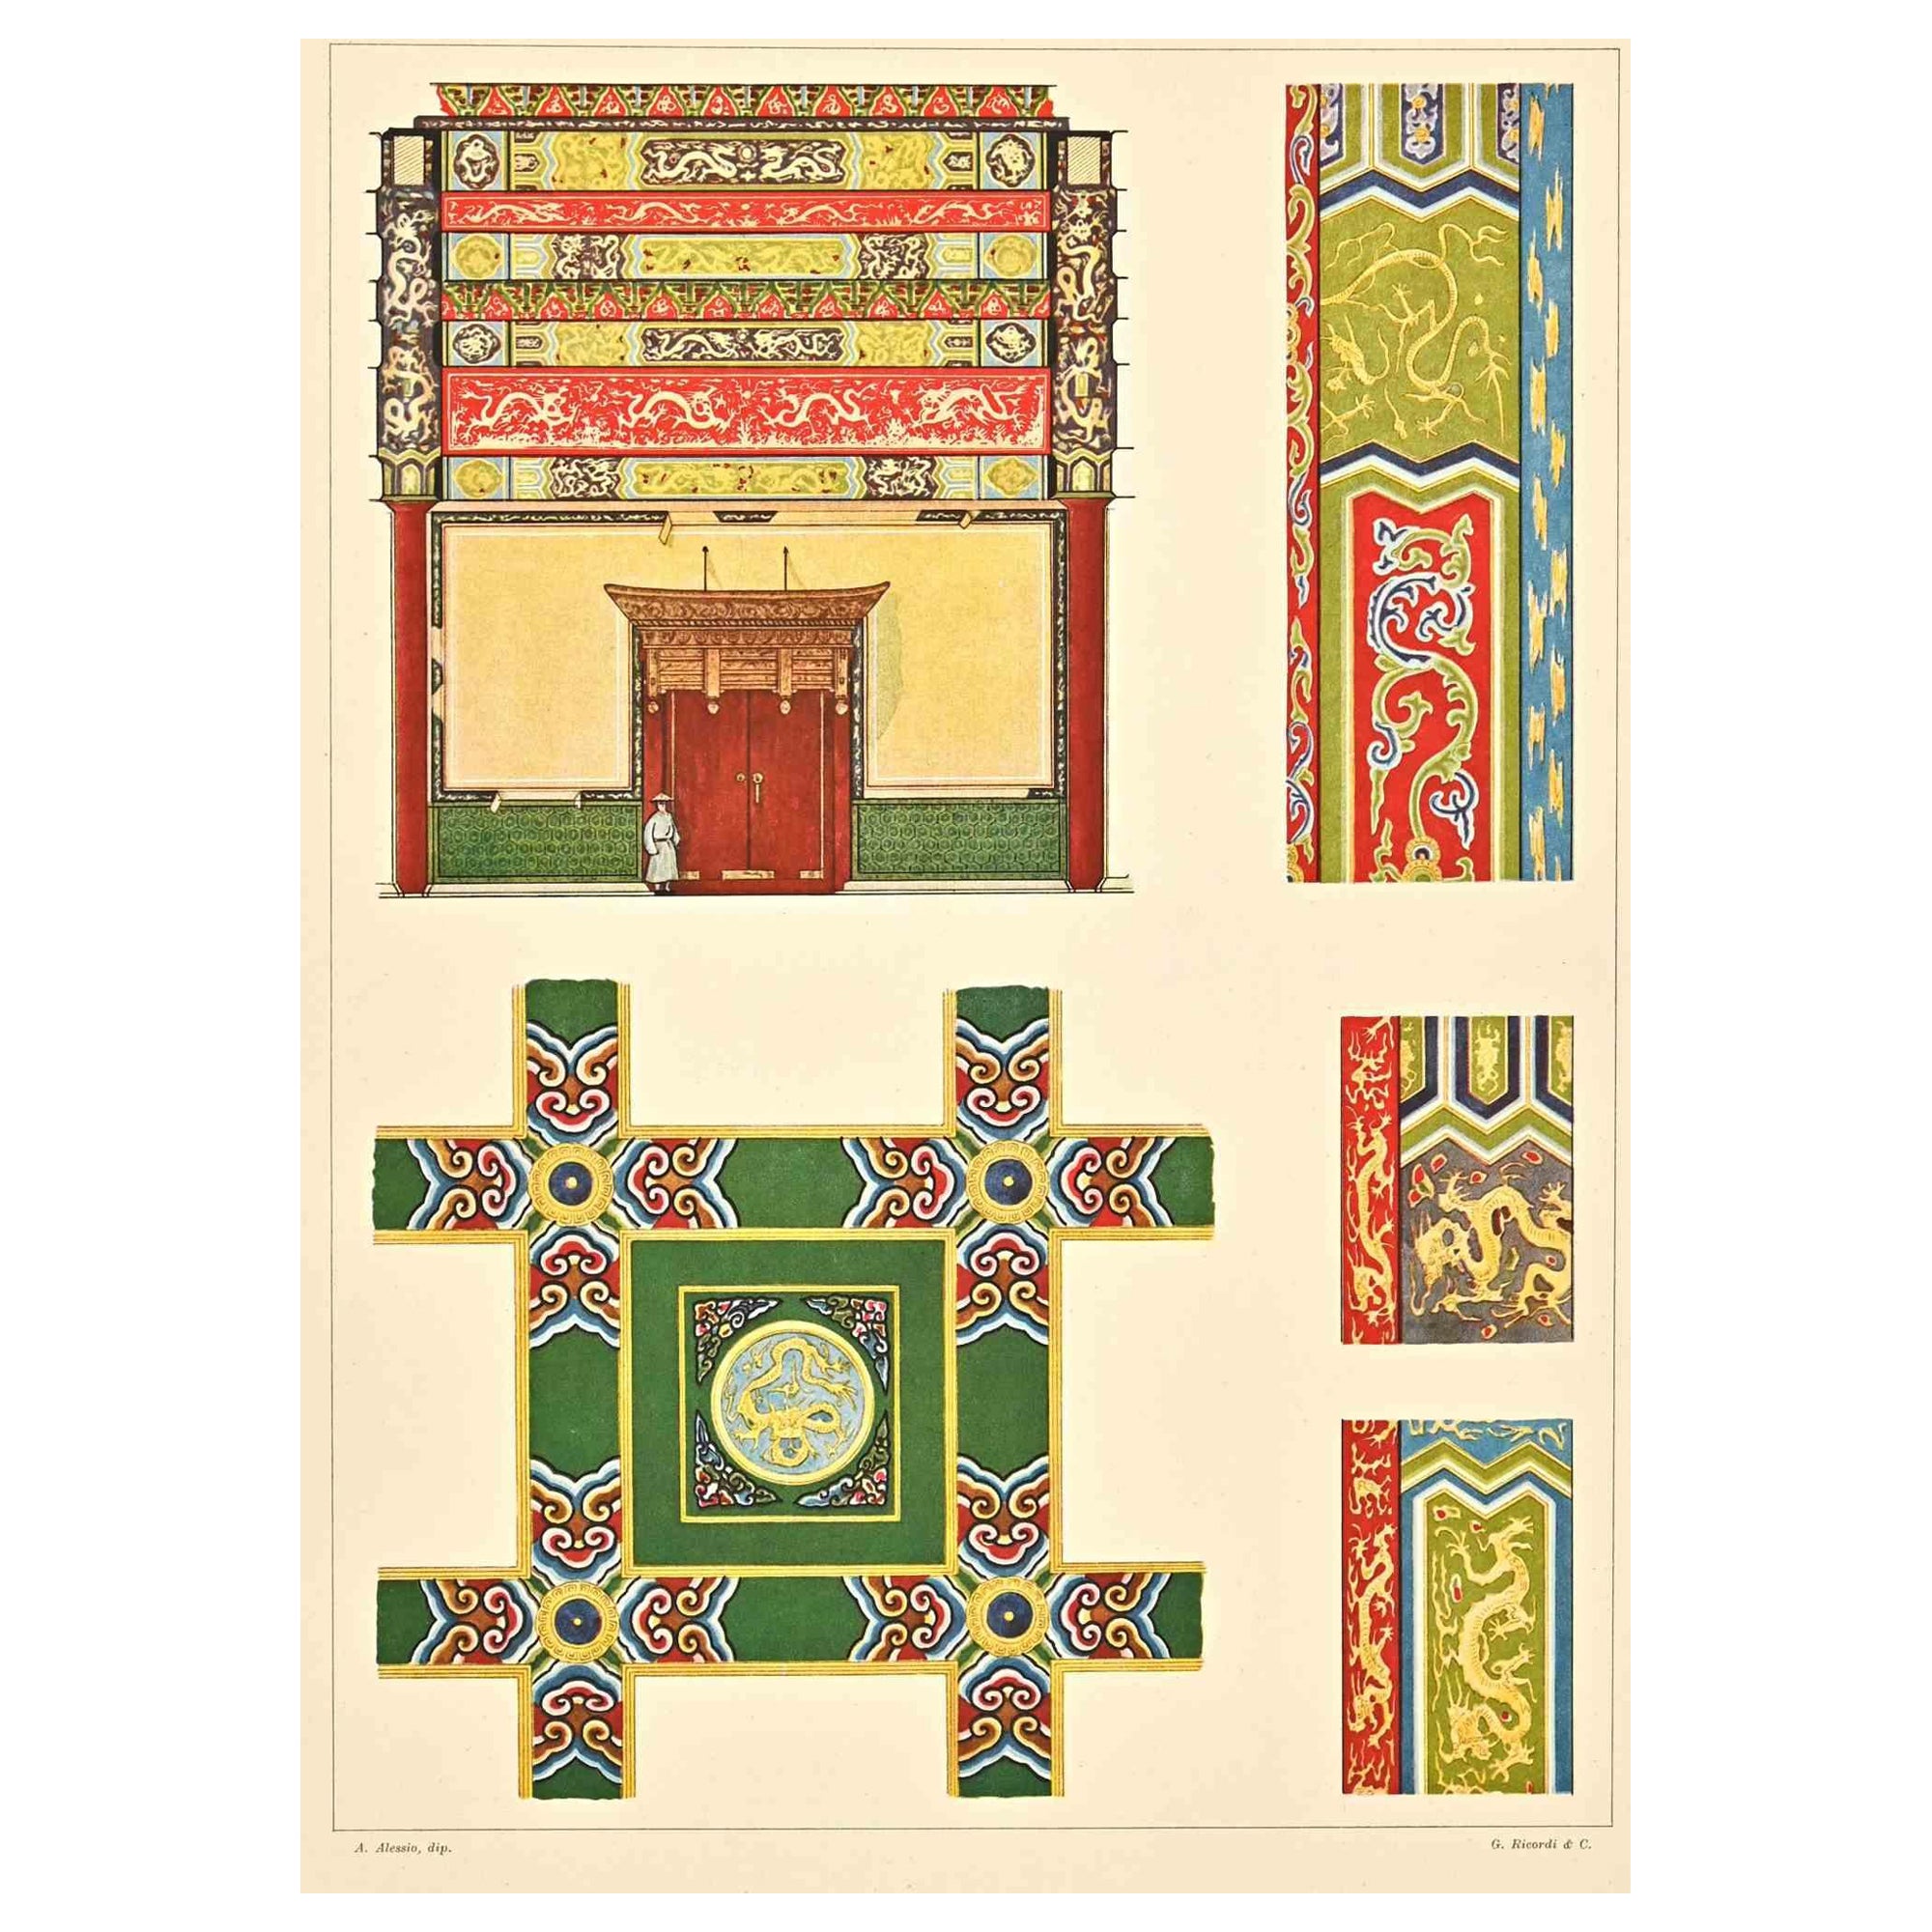 Decorative Motifs - Chinese  Styles  is a print on ivory-colored paper realized by Andrea Alessio in the  early 20th Century. Signed on the plate on the lower.

Vintage Chromolithograph.

Very good conditions.

The artwork represents Decorative